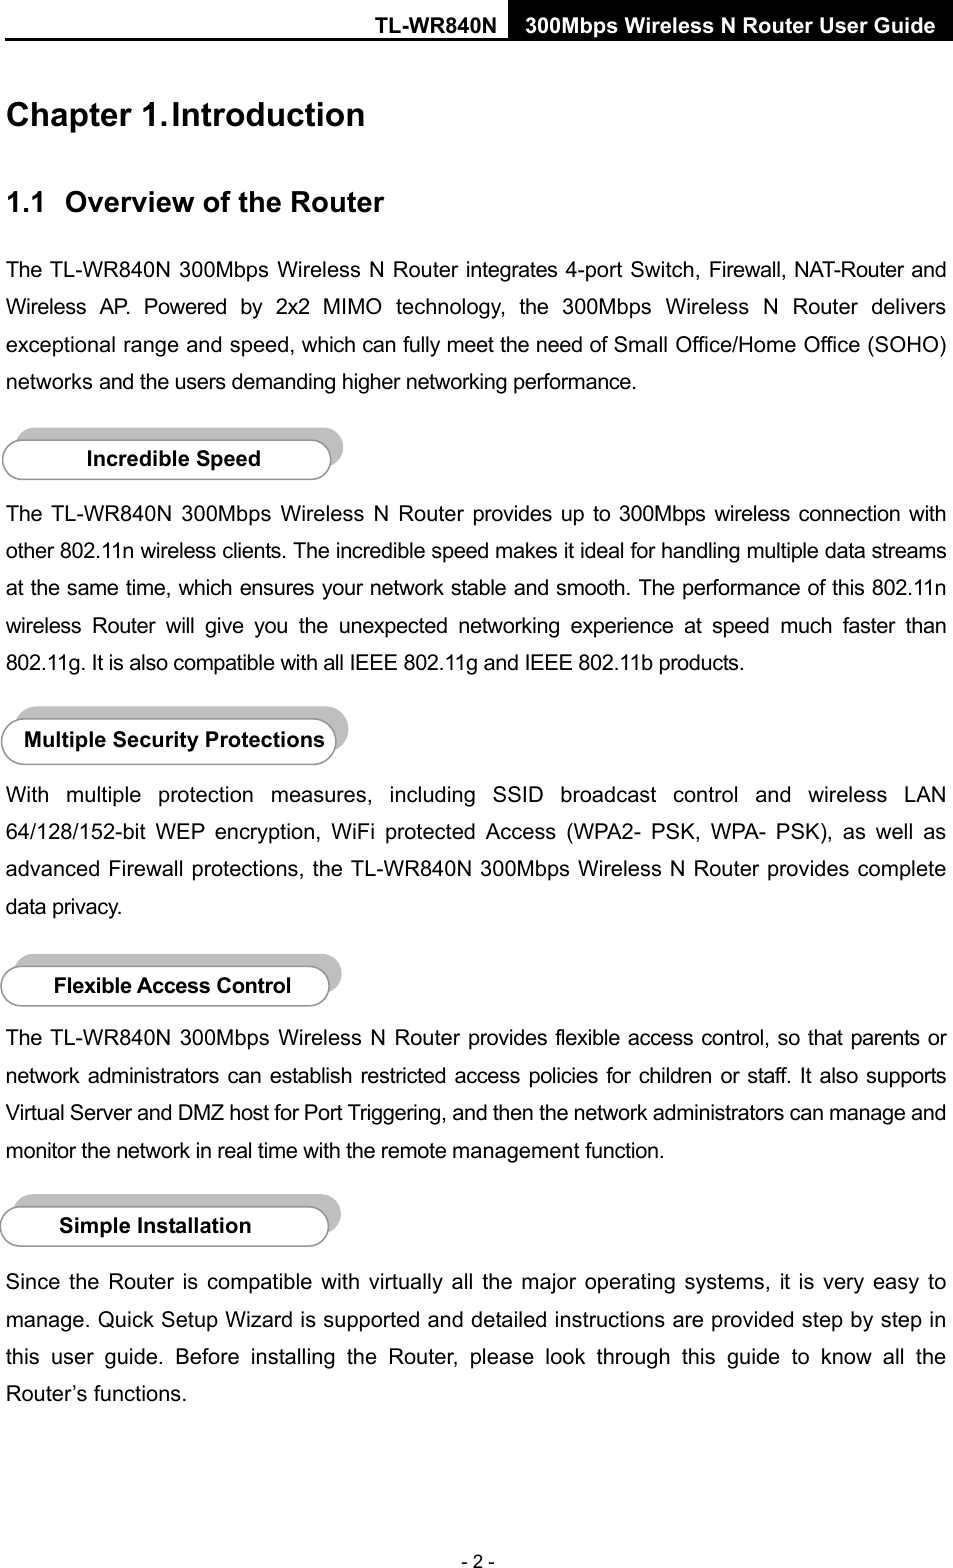 TL-WR840N 300Mbps Wireless N Router User Guide  - 2 - Chapter 1. Introduction 1.1 Overview of the Router The TL-WR840N 300Mbps Wireless N Router integrates 4-port Switch, Firewall, NAT-Router and Wireless AP. Powered by  2x2  MIMO technology,  the 300Mbps  Wireless N Router delivers exceptional range and speed, which can fully meet the need of Small Office/Home Office (SOHO) networks and the users demanding higher networking performance.  The  TL-WR840N 300Mbps  Wireless N Router provides up to 300Mbps wireless connection with other 802.11n wireless clients. The incredible speed makes it ideal for handling multiple data streams at the same time, which ensures your network stable and smooth. The performance of this 802.11n wireless  Router will give you the unexpected networking experience at speed much faster than 802.11g. It is also compatible with all IEEE 802.11g and IEEE 802.11b products.  With multiple protection measures, including SSID broadcast control and wireless LAN 64/128/152-bit WEP encryption,  WiFi protected Access (WPA2-  PSK, WPA-  PSK), as well as advanced Firewall protections, the TL-WR840N 300Mbps Wireless N Router provides complete data privacy.    The TL-WR840N 300Mbps Wireless N Router provides flexible access control, so that parents or network administrators can establish restricted access policies for children or staff. It also supports Virtual Server and DMZ host for Port Triggering, and then the network administrators can manage and monitor the network in real time with the remote management function.    Since  the Router is compatible with virtually all the major operating systems, it is  very  easy to manage. Quick Setup Wizard is supported and detailed instructions are provided step by step in this user guide.  Before installing the Router, please look through this guide to know all the Router’s functions. Simple Installation Flexible Access Control  Multiple Security Protections Incredible Speed  